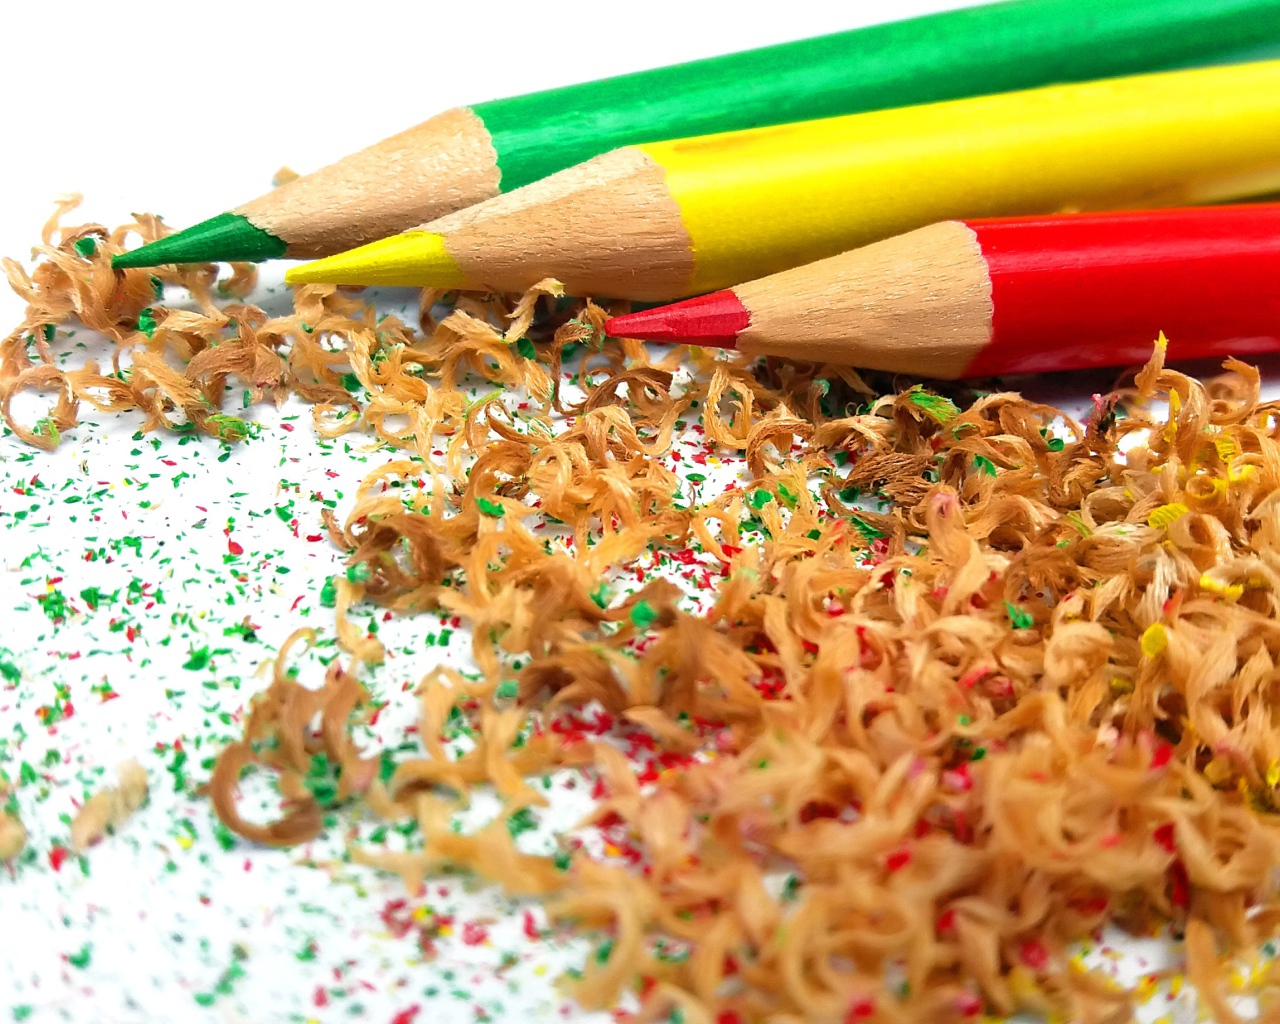 Sharp sharpened pencils with shavings on a white background